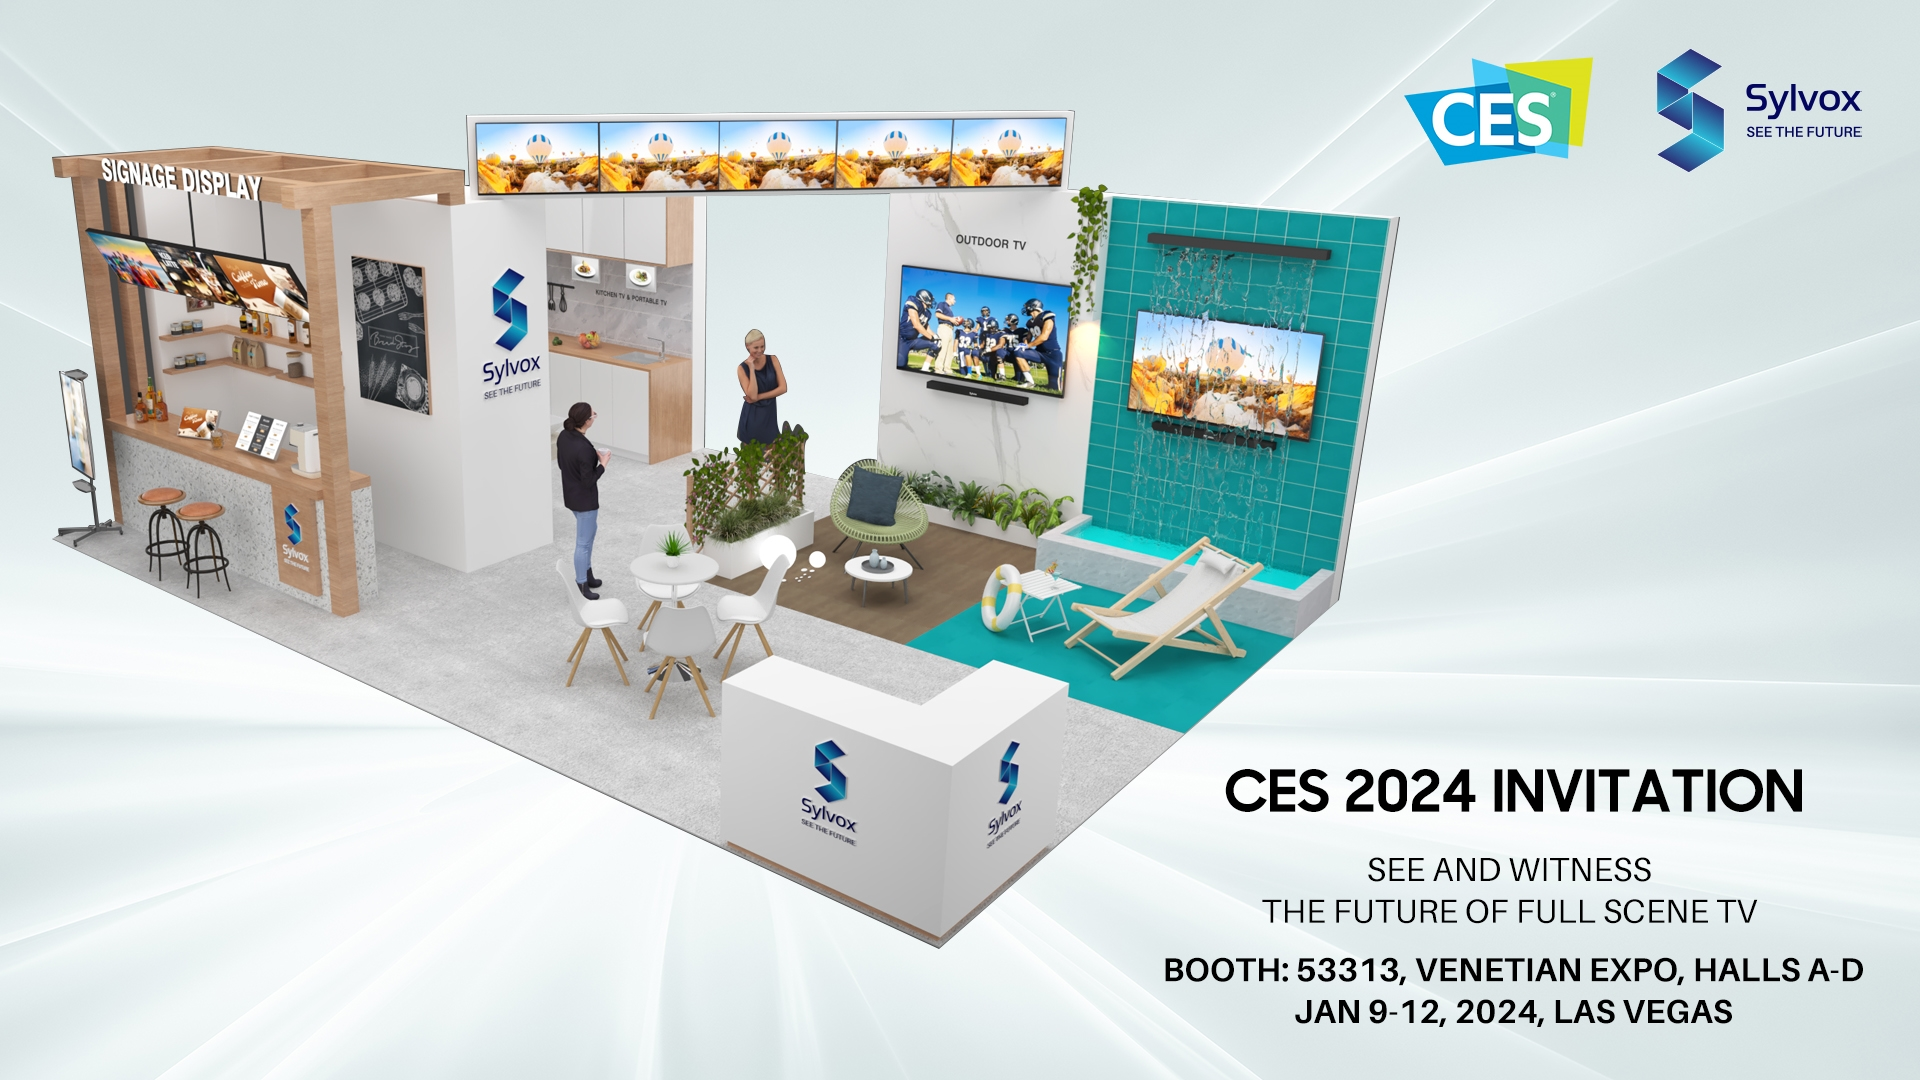 Explore Our Latest Innovation at CES 2024